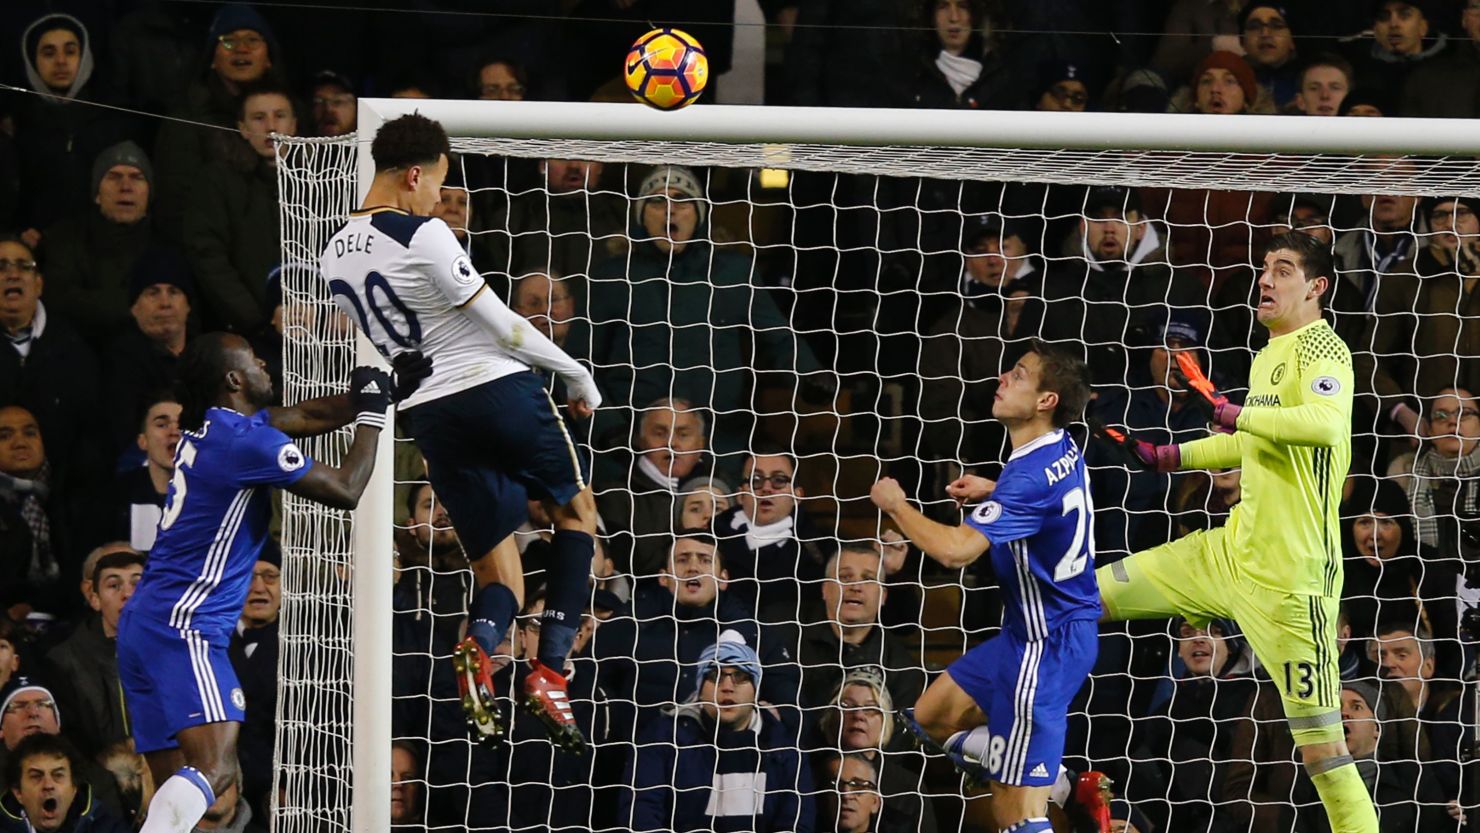 Dele Alli jumps to score his and Tottenham's second goal against Chelsea.